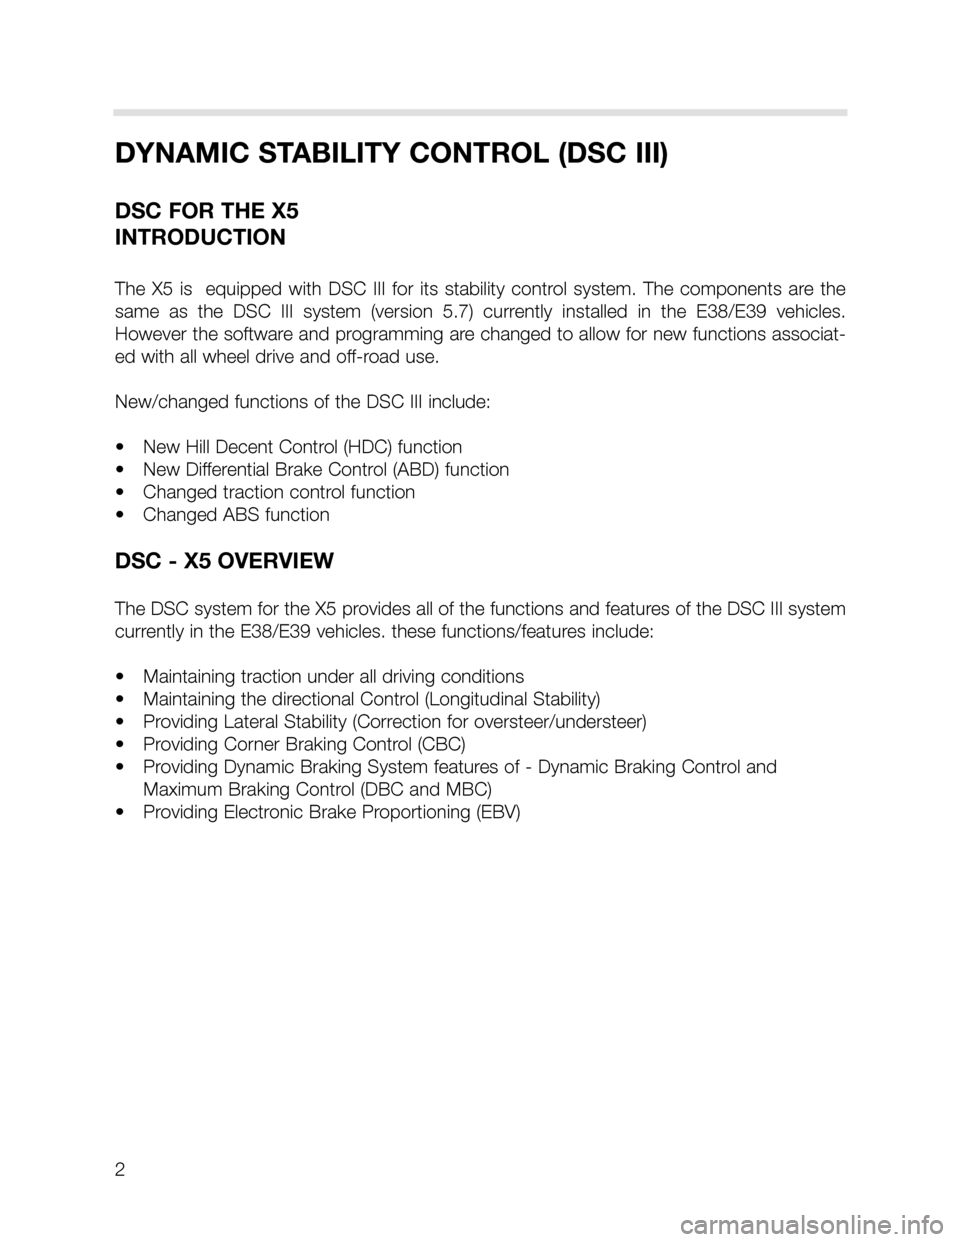 BMW X5 2001 E53 DSC System Workshop Manual 2
DYNAMIC STABILITY CONTROL (DSC III)
DSC FOR THE X5
INTRODUCTION
The  X5  is    equipped  with  DSC  III  for  its  stability  control  system.  The  components  are  the
same  as  the  DSC  III  sys